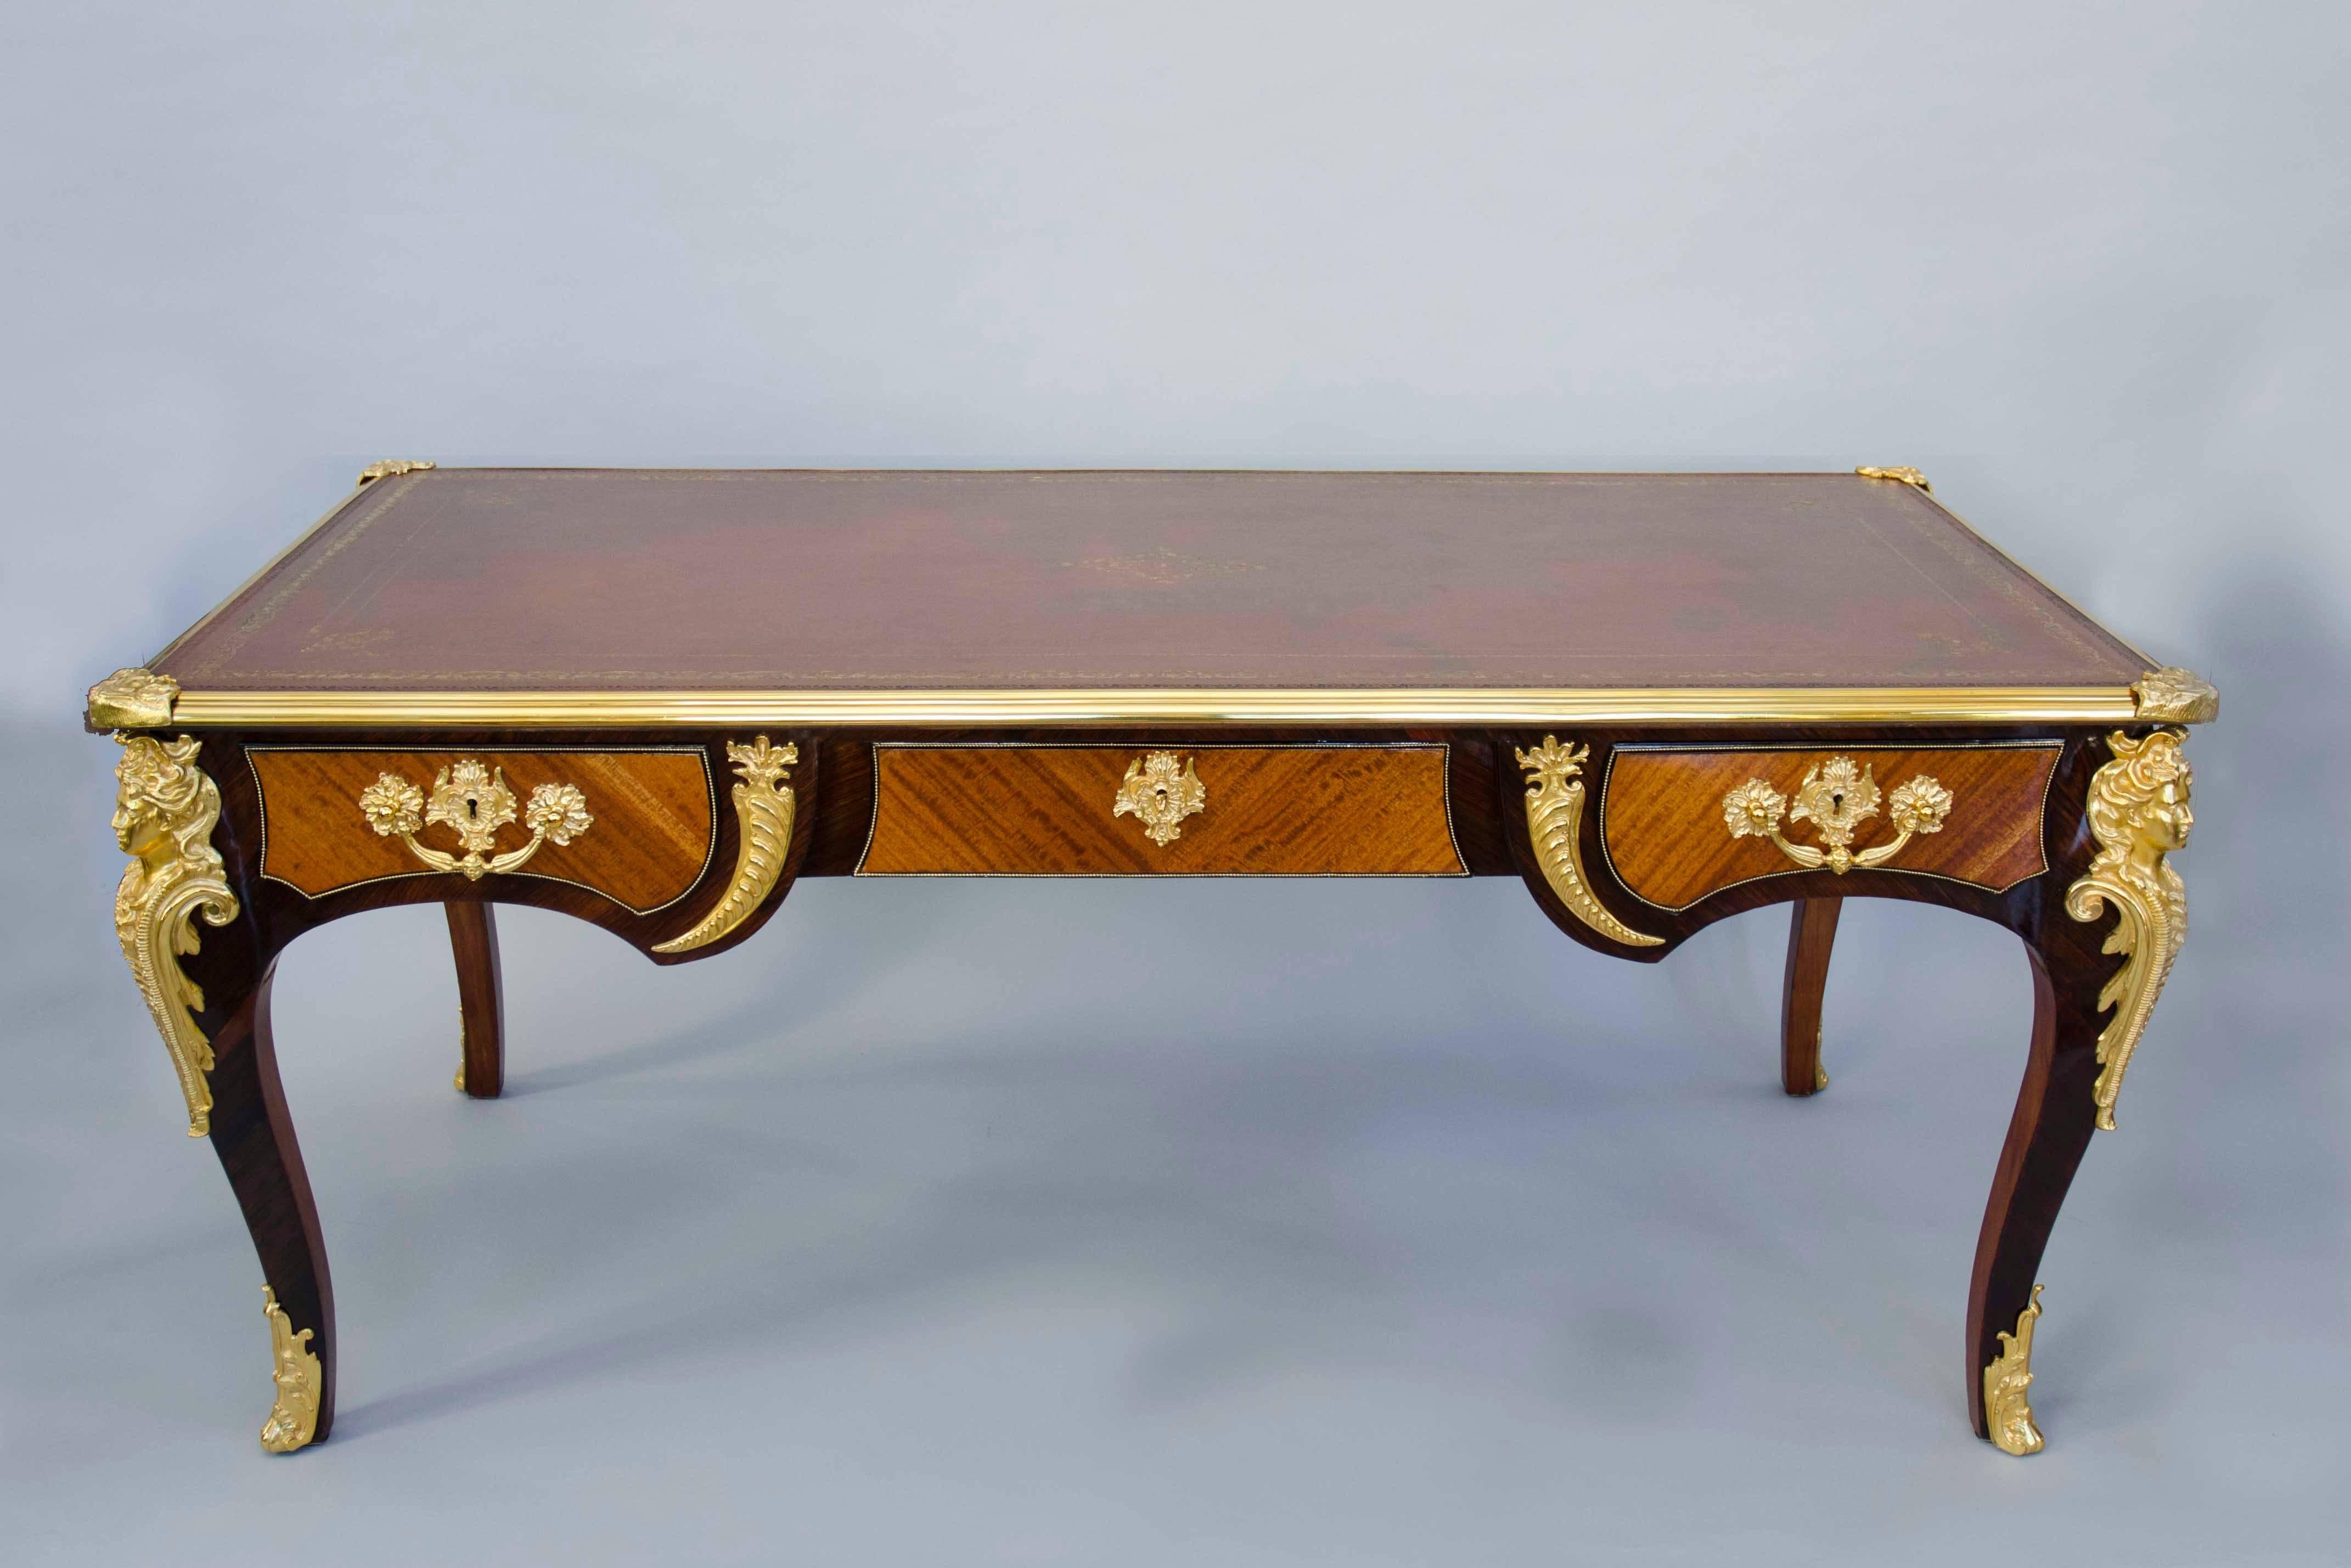 Bronze 19th Century French Regency Style Rose and Kingwood Office Desk, after Cressent